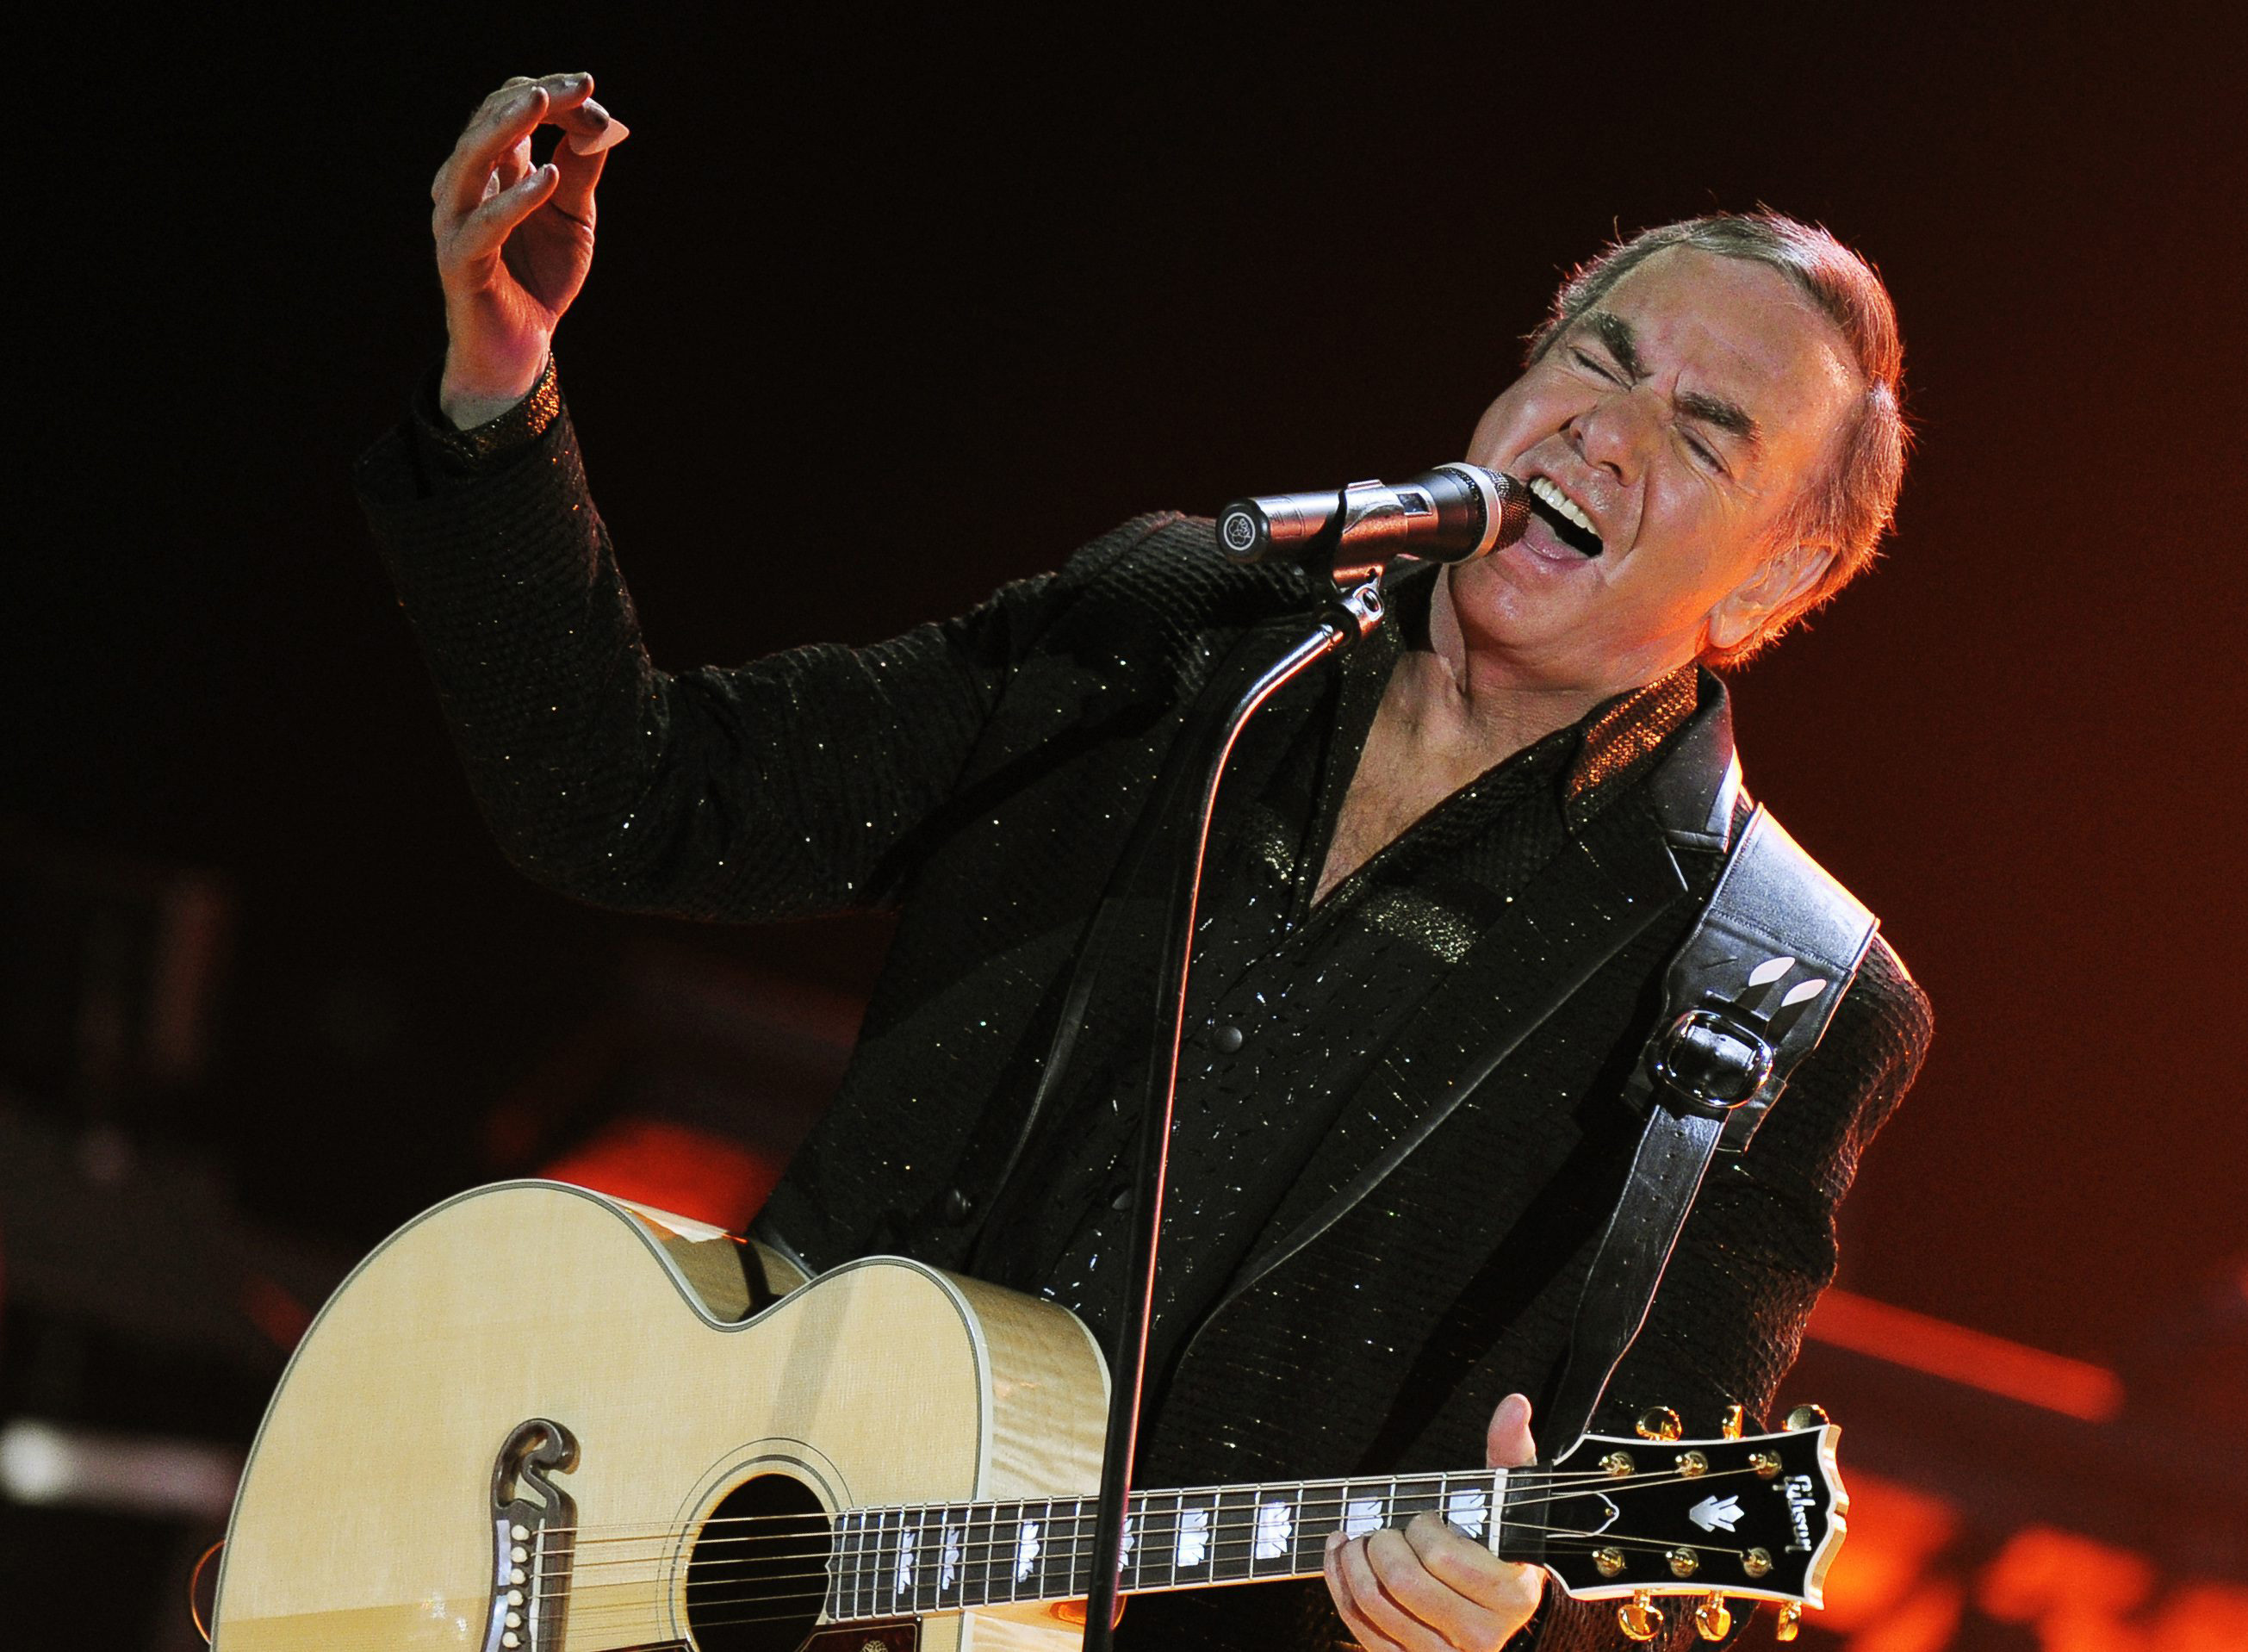 After Neil Diamond's Parkinson's diagnosis, here's what you need